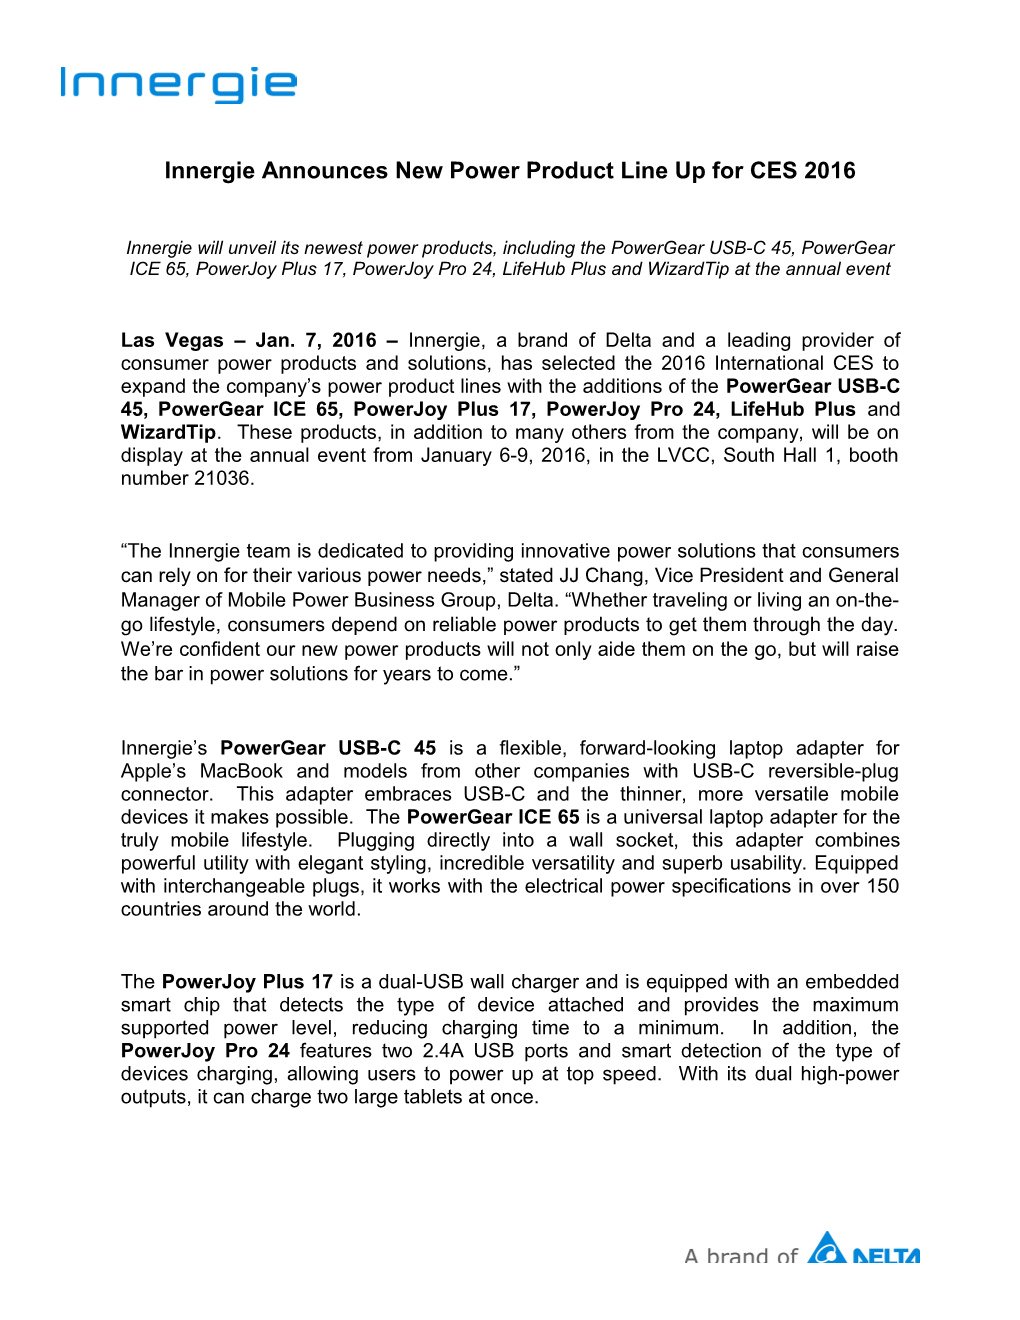 Innergie Announces New Power Product Line up for CES 2016